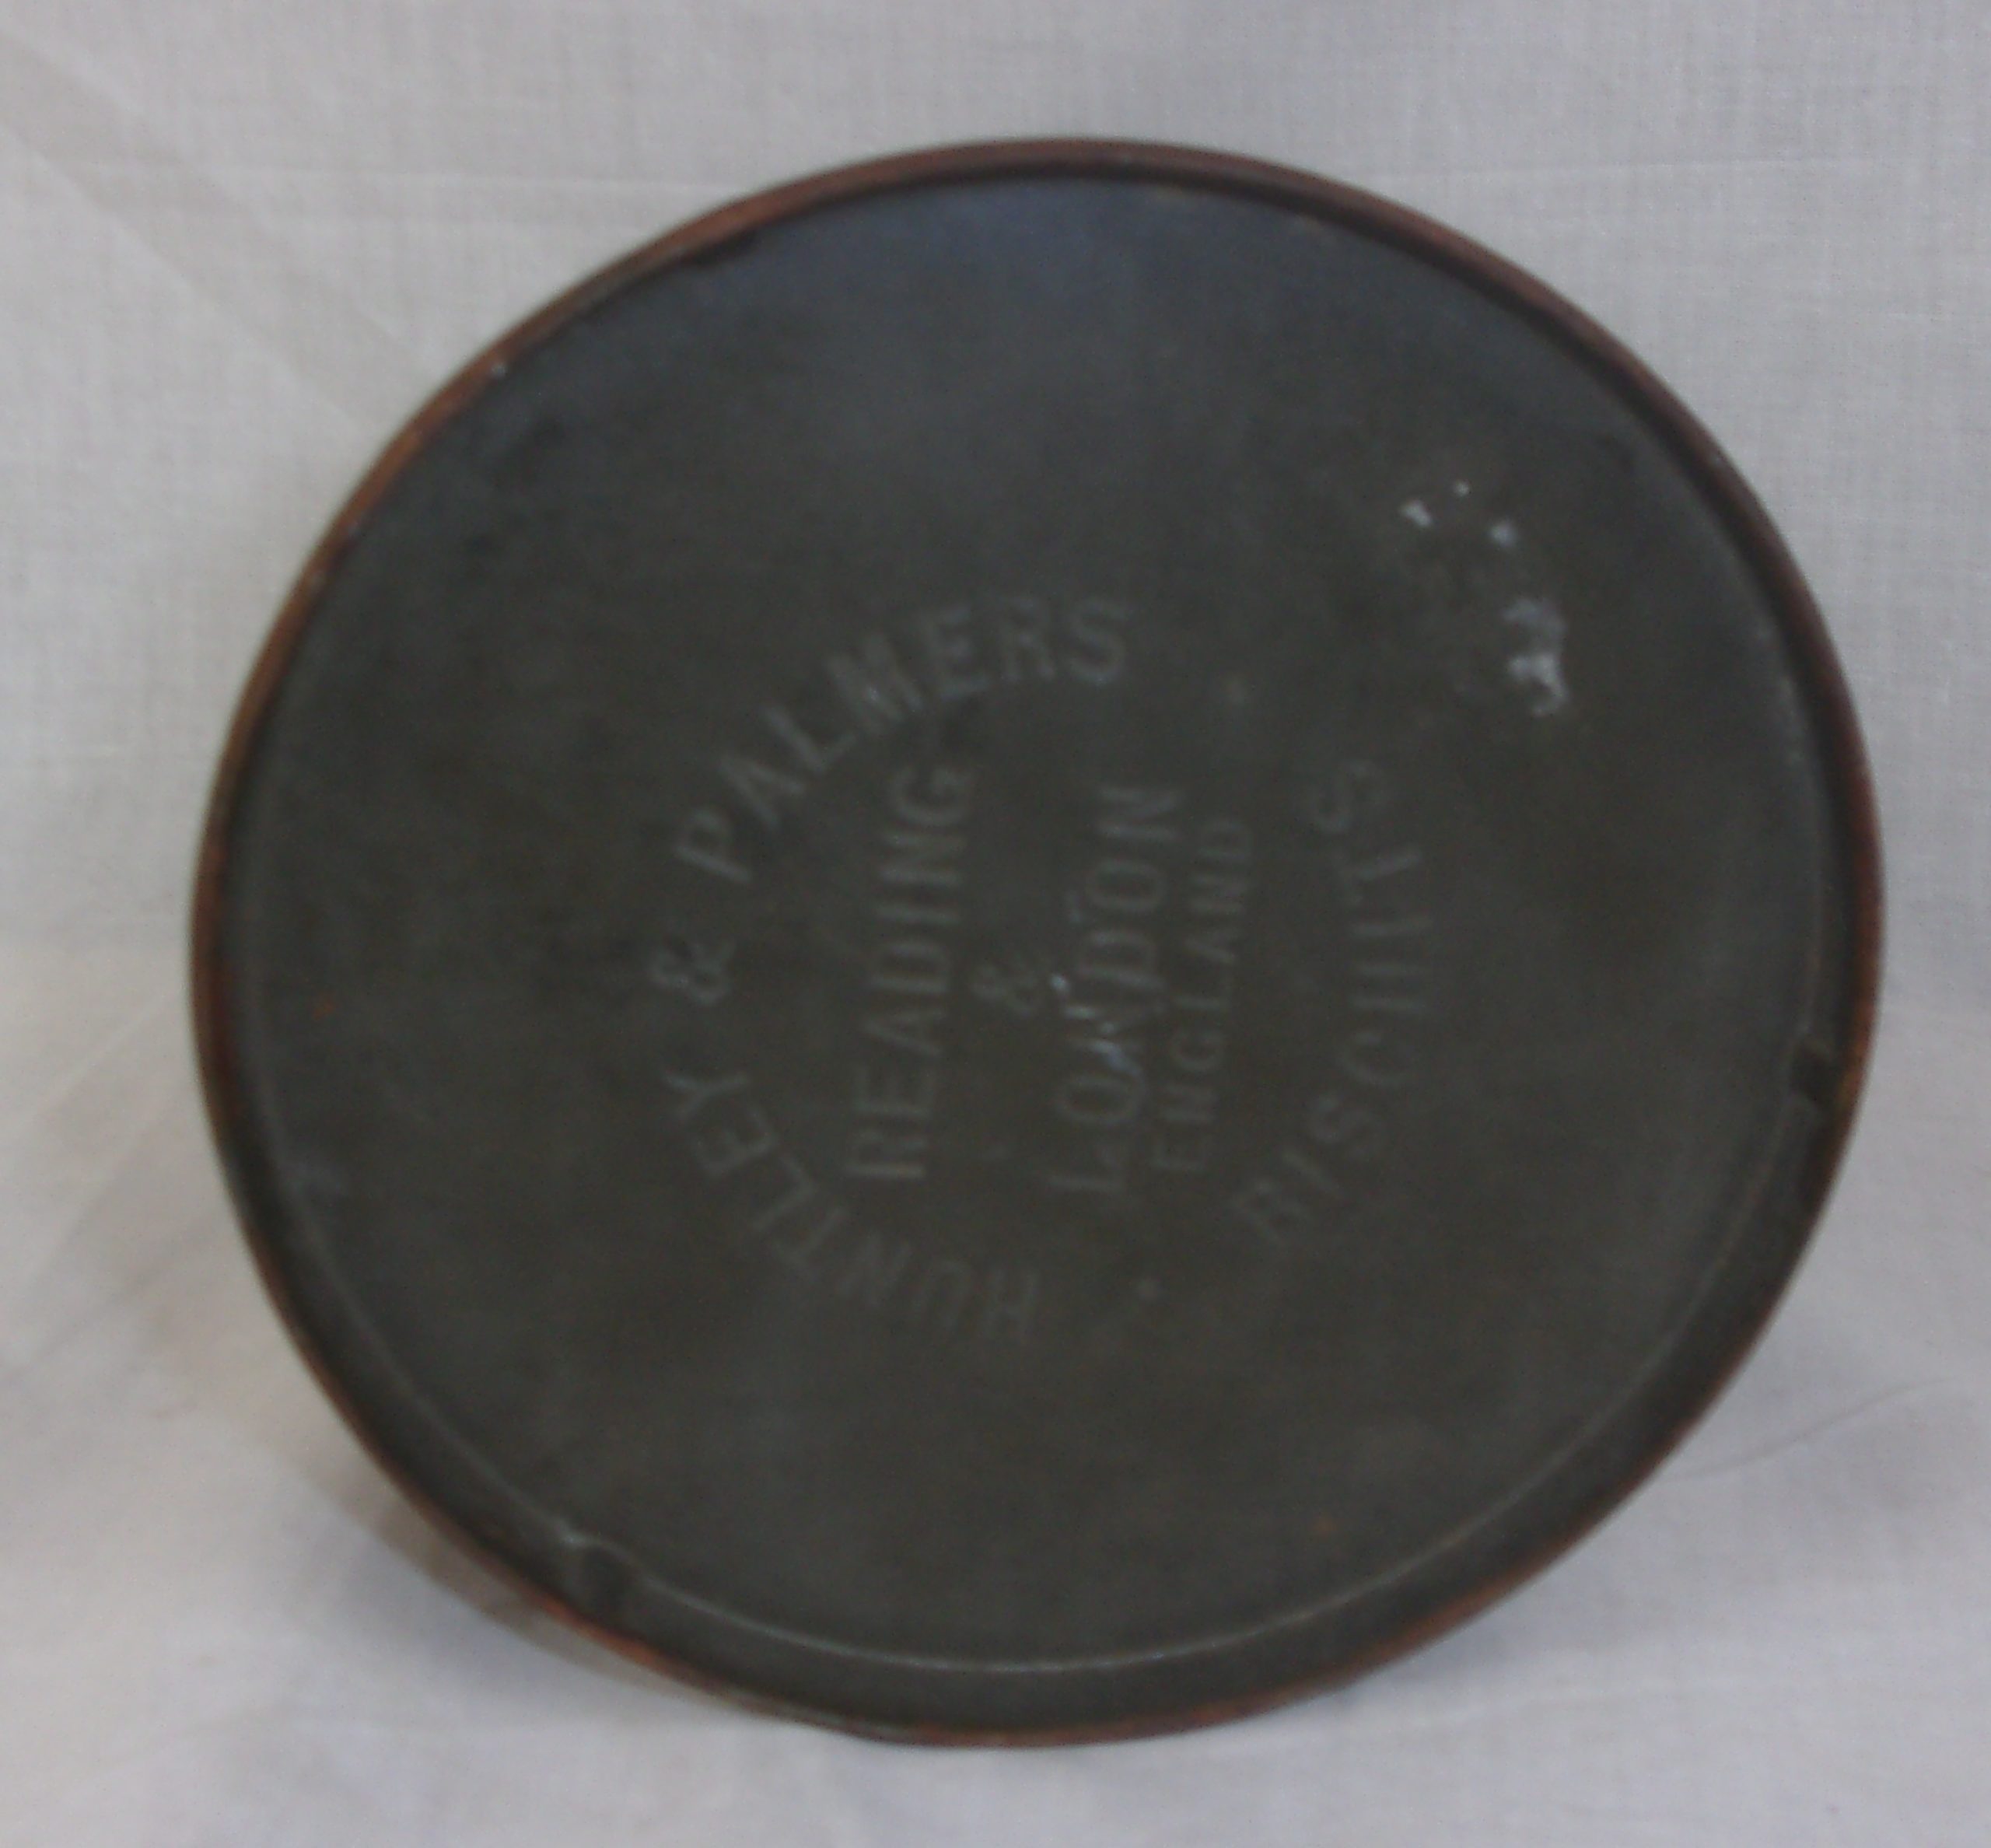 Circa 1911 Huntley And Palmers Painted Biscuit Tin In The Form Of